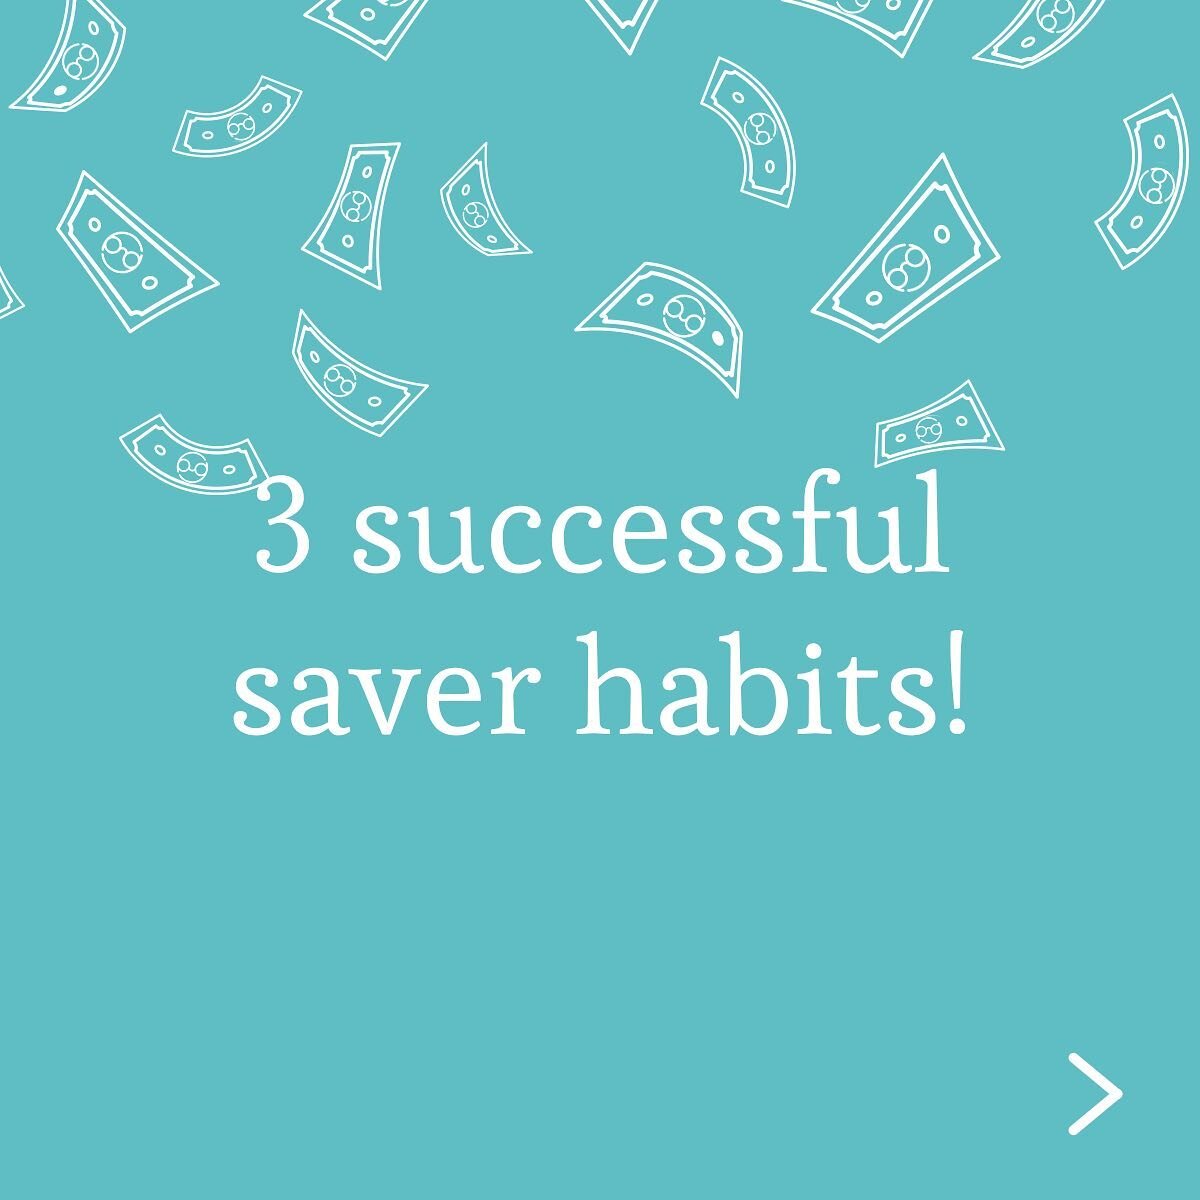 Want to be a SUCCESSFUL SAVER? 🤓 Check out these 3 ULTIMATE HACKS! 

💰 Save 3-6 months worth of expenses: This is a critical first step to become a successful saver. Having a lump-sum of emergency money to fall back on gives you time to get back on